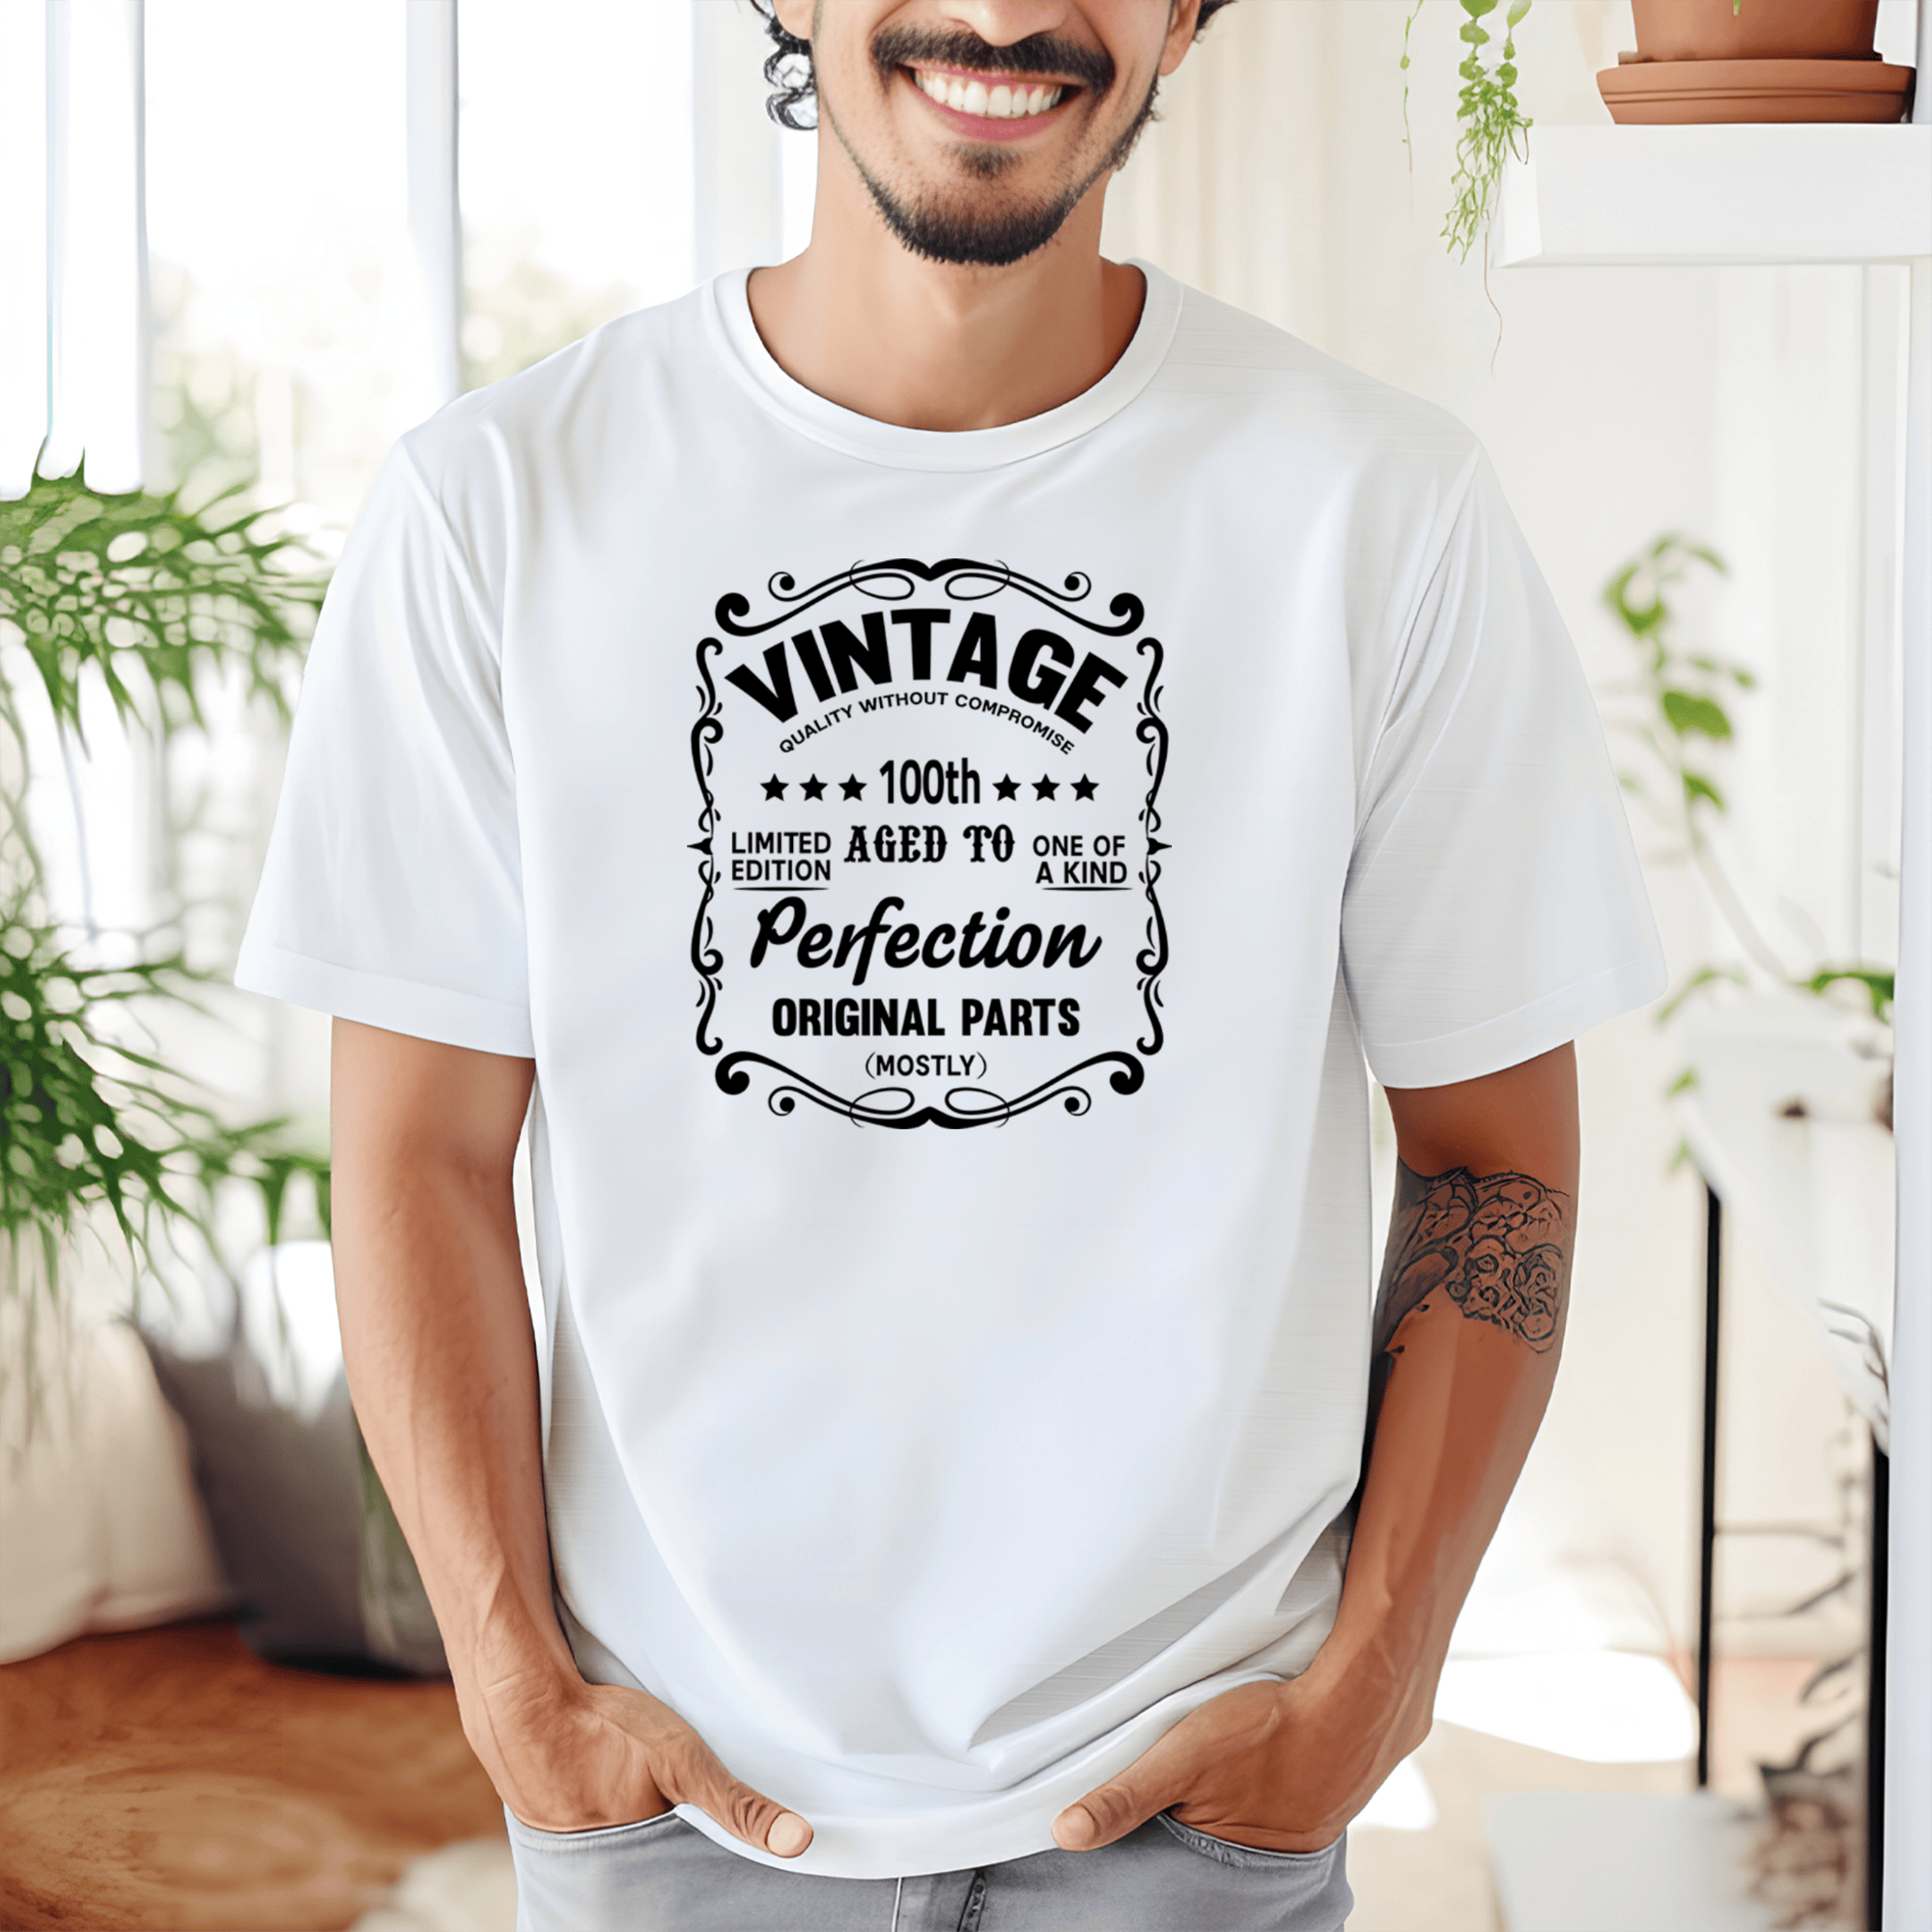 Mens White T Shirt with 100th-Vintage design